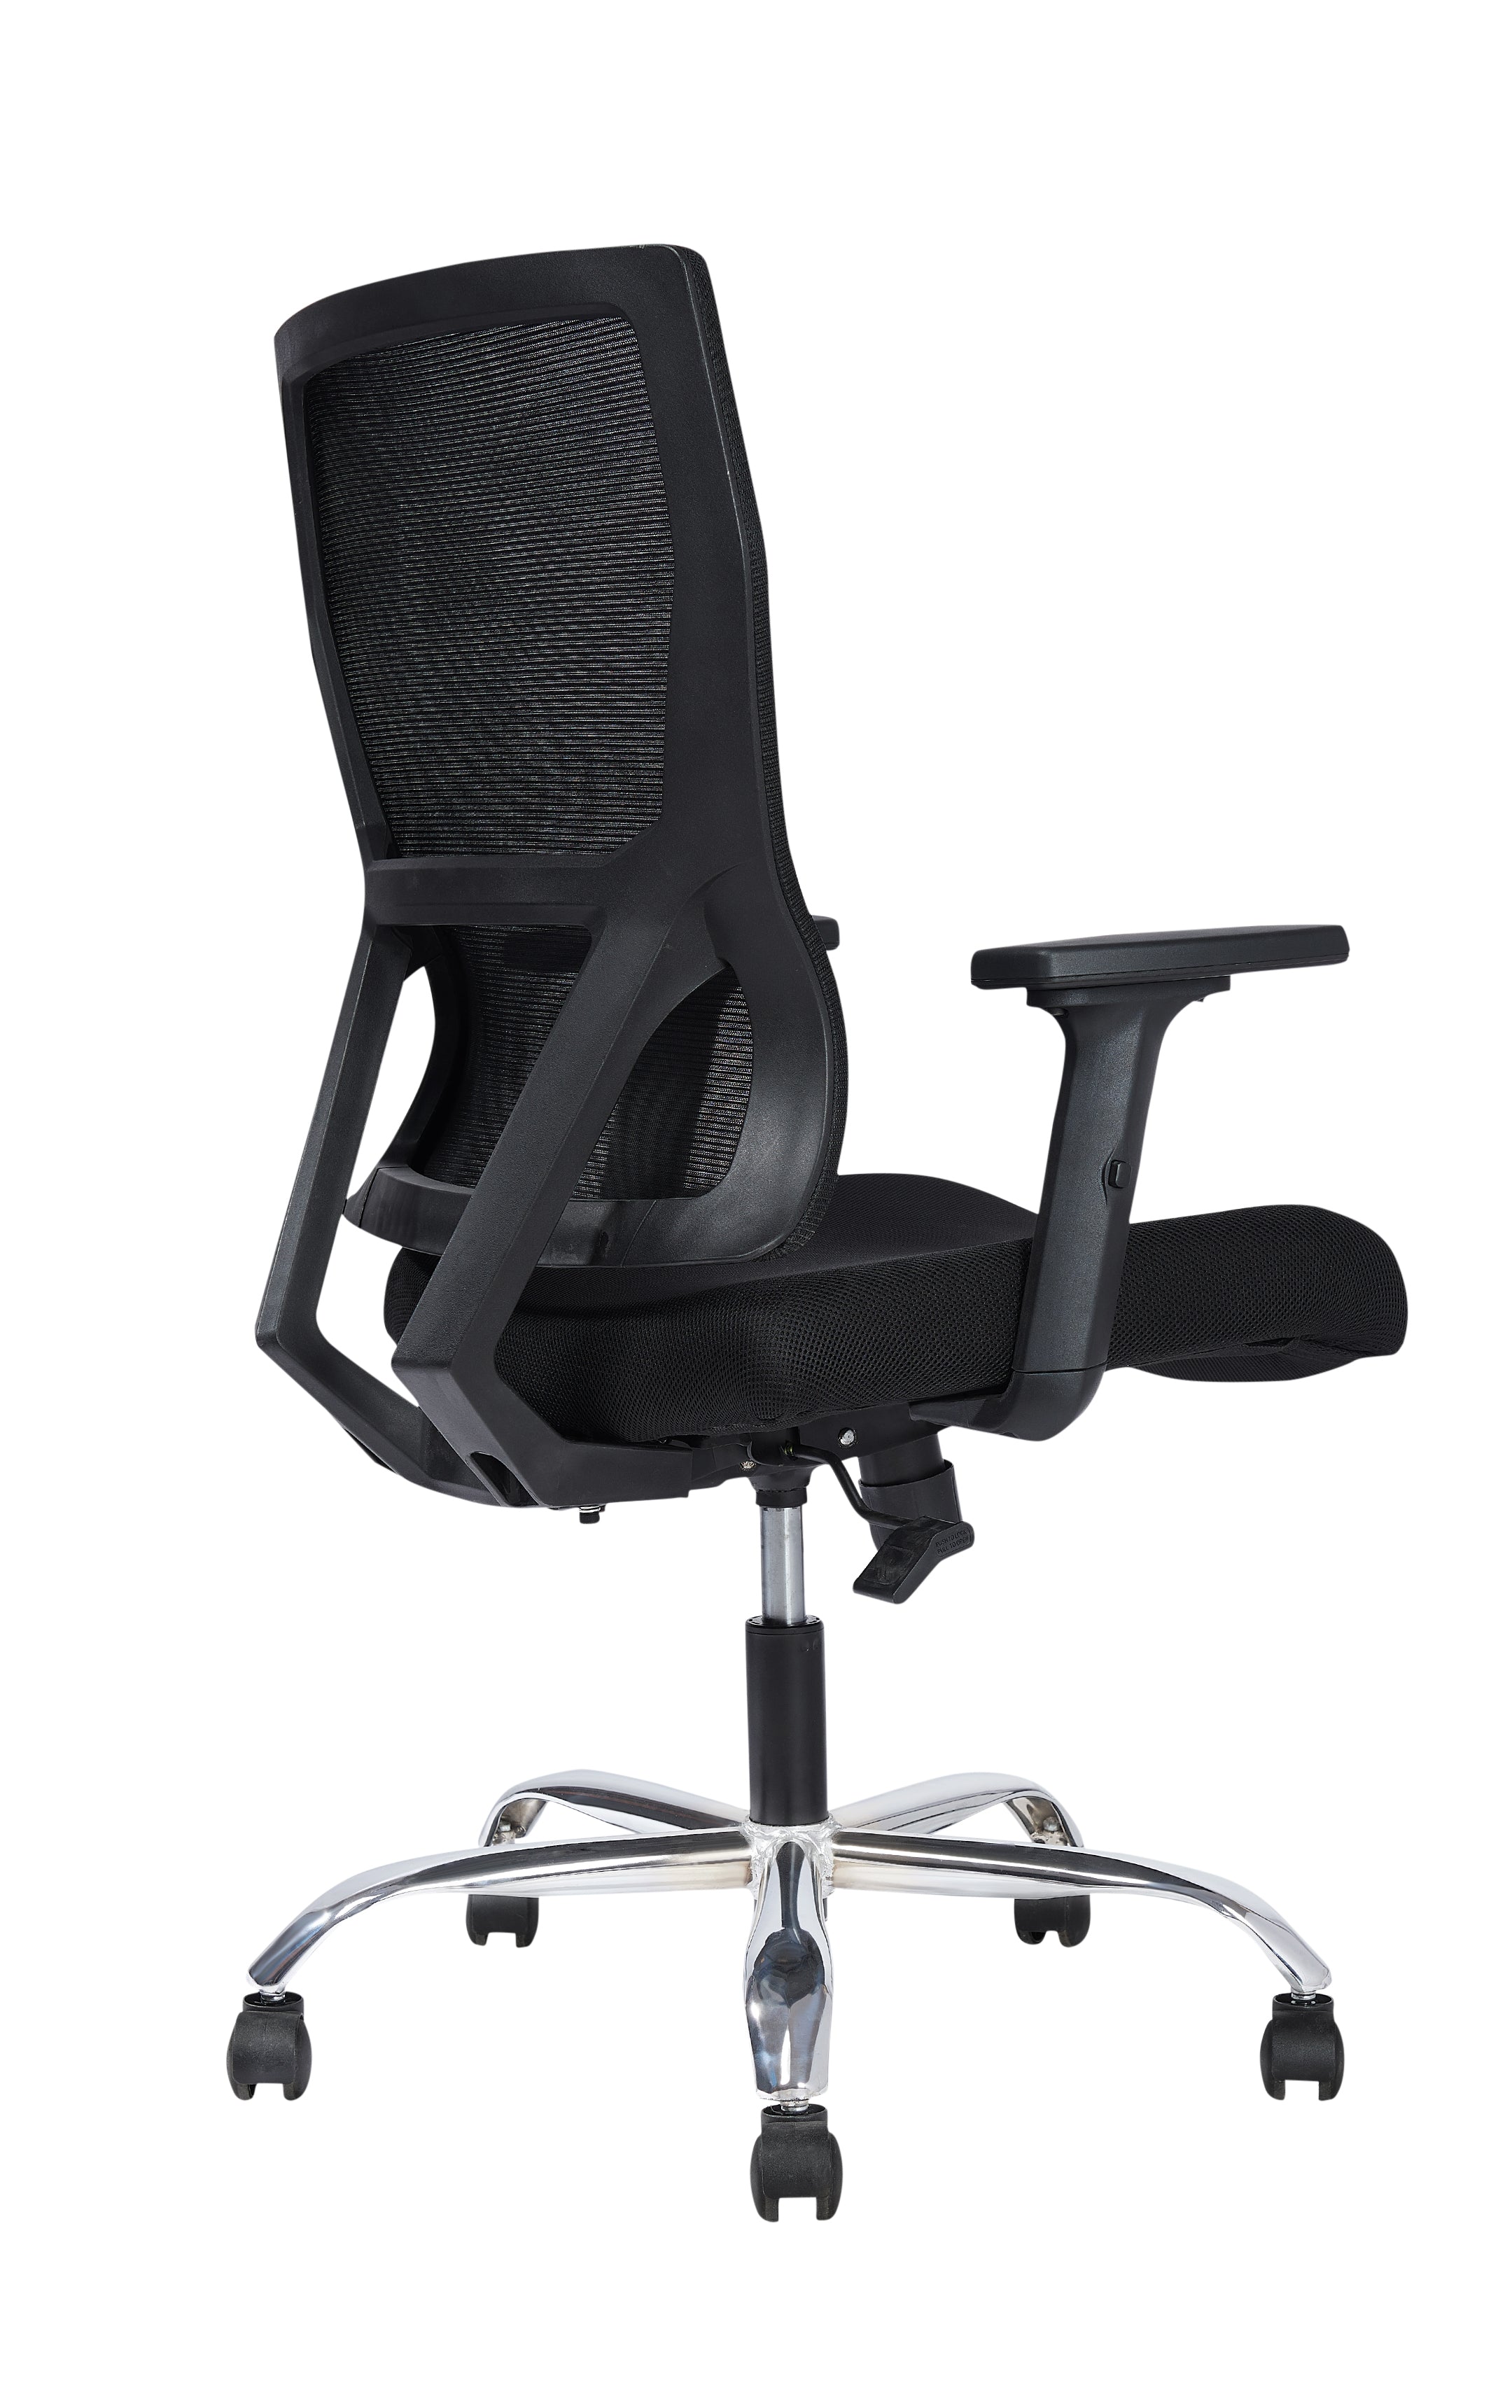 Agustin Mid Back Ergonomic Office Chair With Cushion Seat, 2D Armrest And Chrome Base with Nylon Castors- Black